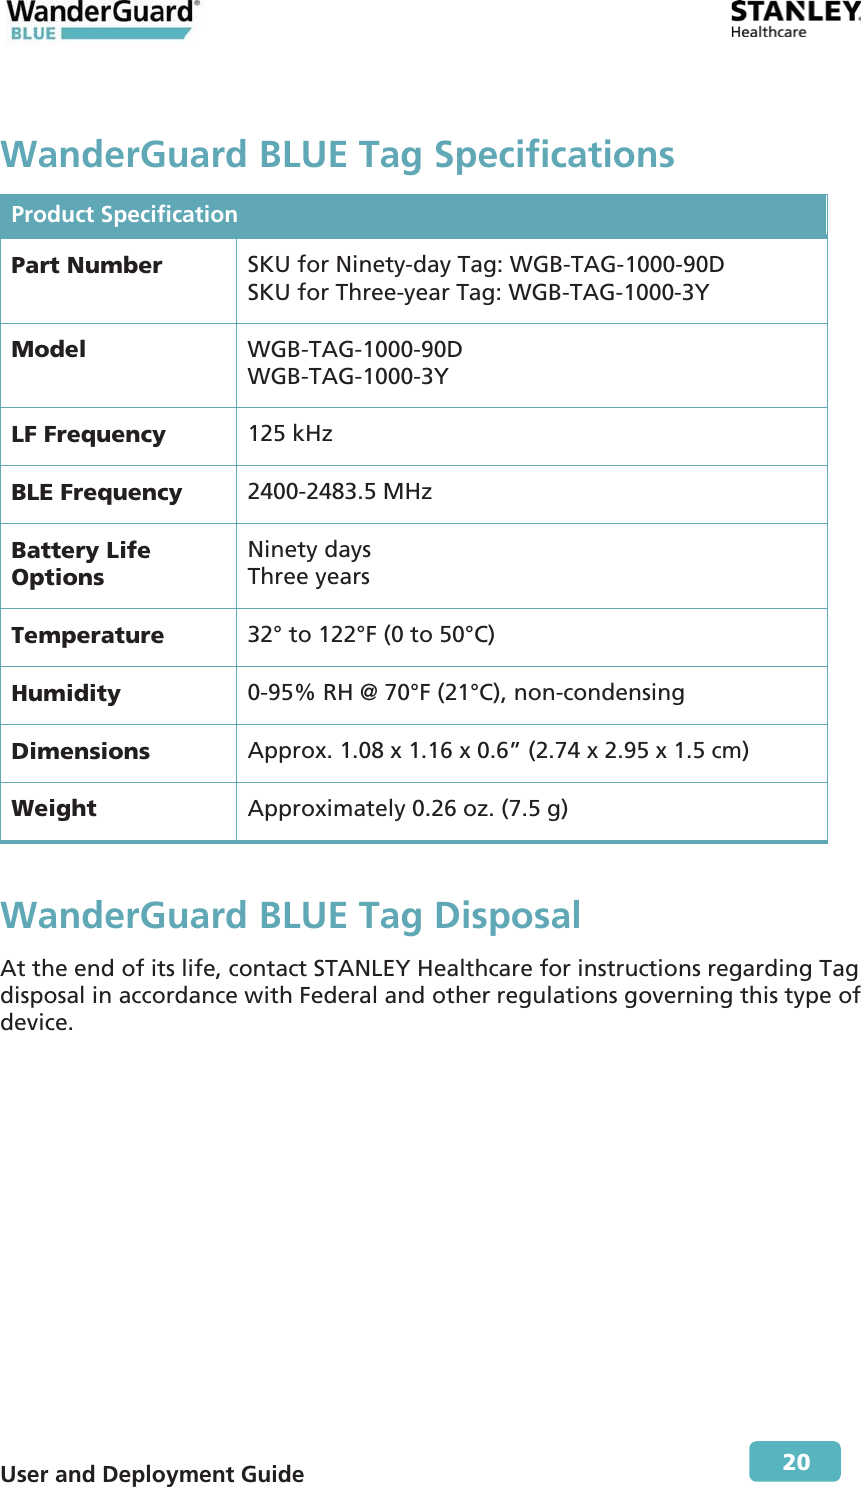  User and Deployment Guide        20 WanderGuard BLUE Tag SpecificationsProduct Specification Part Number  SKU for Ninety-day Tag: WGB-TAG-1000-90D SKU for Three-year Tag: WGB-TAG-1000-3Y Model  WGB-TAG-1000-90D WGB-TAG-1000-3Y LF Frequency 125 kHz BLE Frequency  2400-2483.5 MHz Battery Life Options Ninety days Three years Temperature  32° to 122°F (0 to 50°C) Humidity  0-95% RH @ 70°F (21°C), non-condensing Dimensions  Approx. 1.08 x 1.16 x 0.6” (2.74 x 2.95 x 1.5 cm) Weight  Approximately 0.26 oz. (7.5 g) WanderGuard BLUE Tag Disposal At the end of its life, contact STANLEY Healthcare for instructions regarding Tag disposal in accordance with Federal and other regulations governing this type of device.  